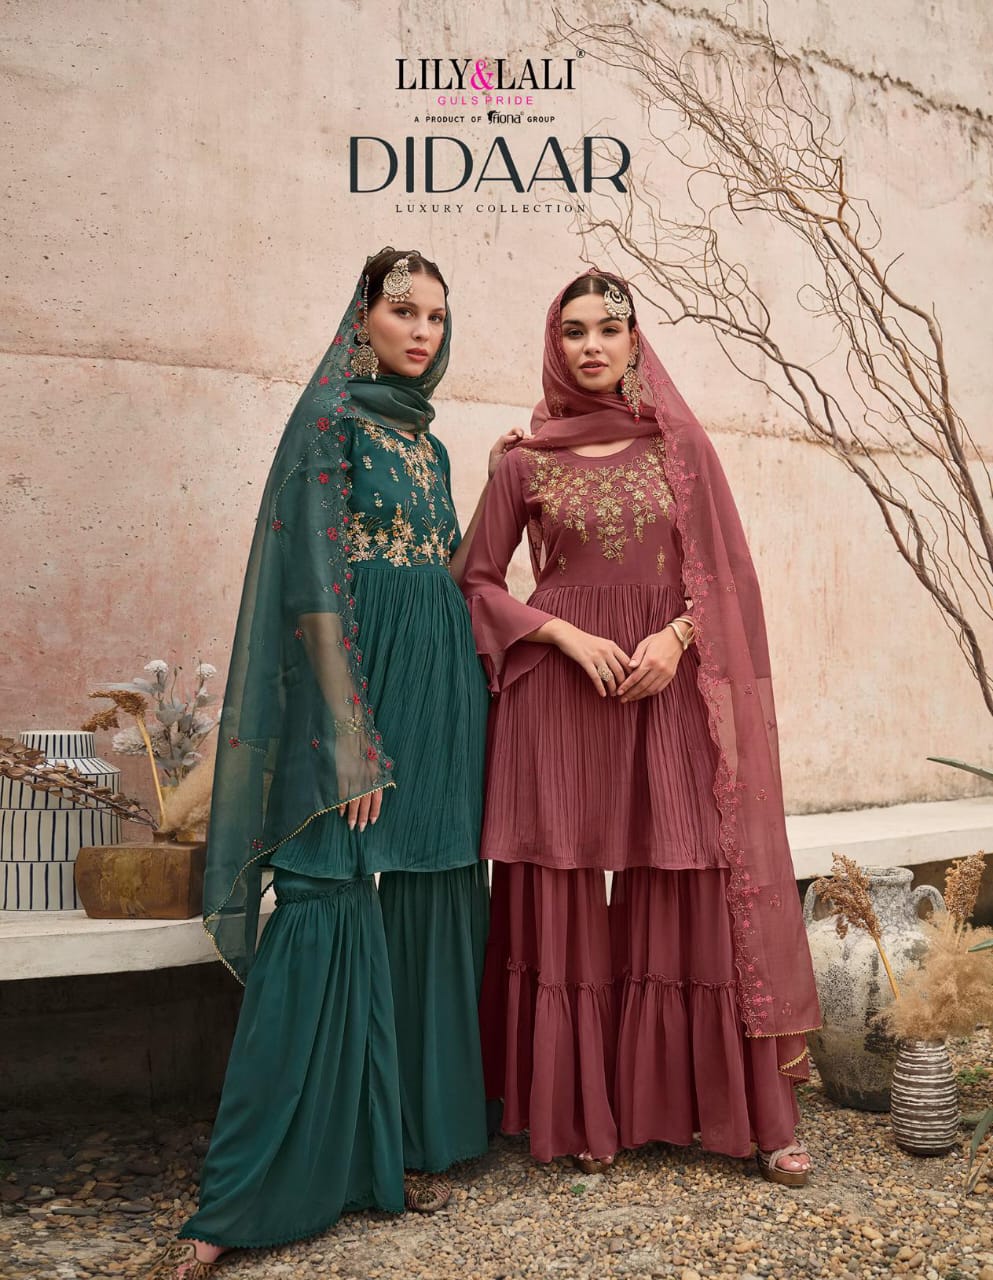 Didaar Lily Lali Georgette Handwork Readymade Sharara Suits